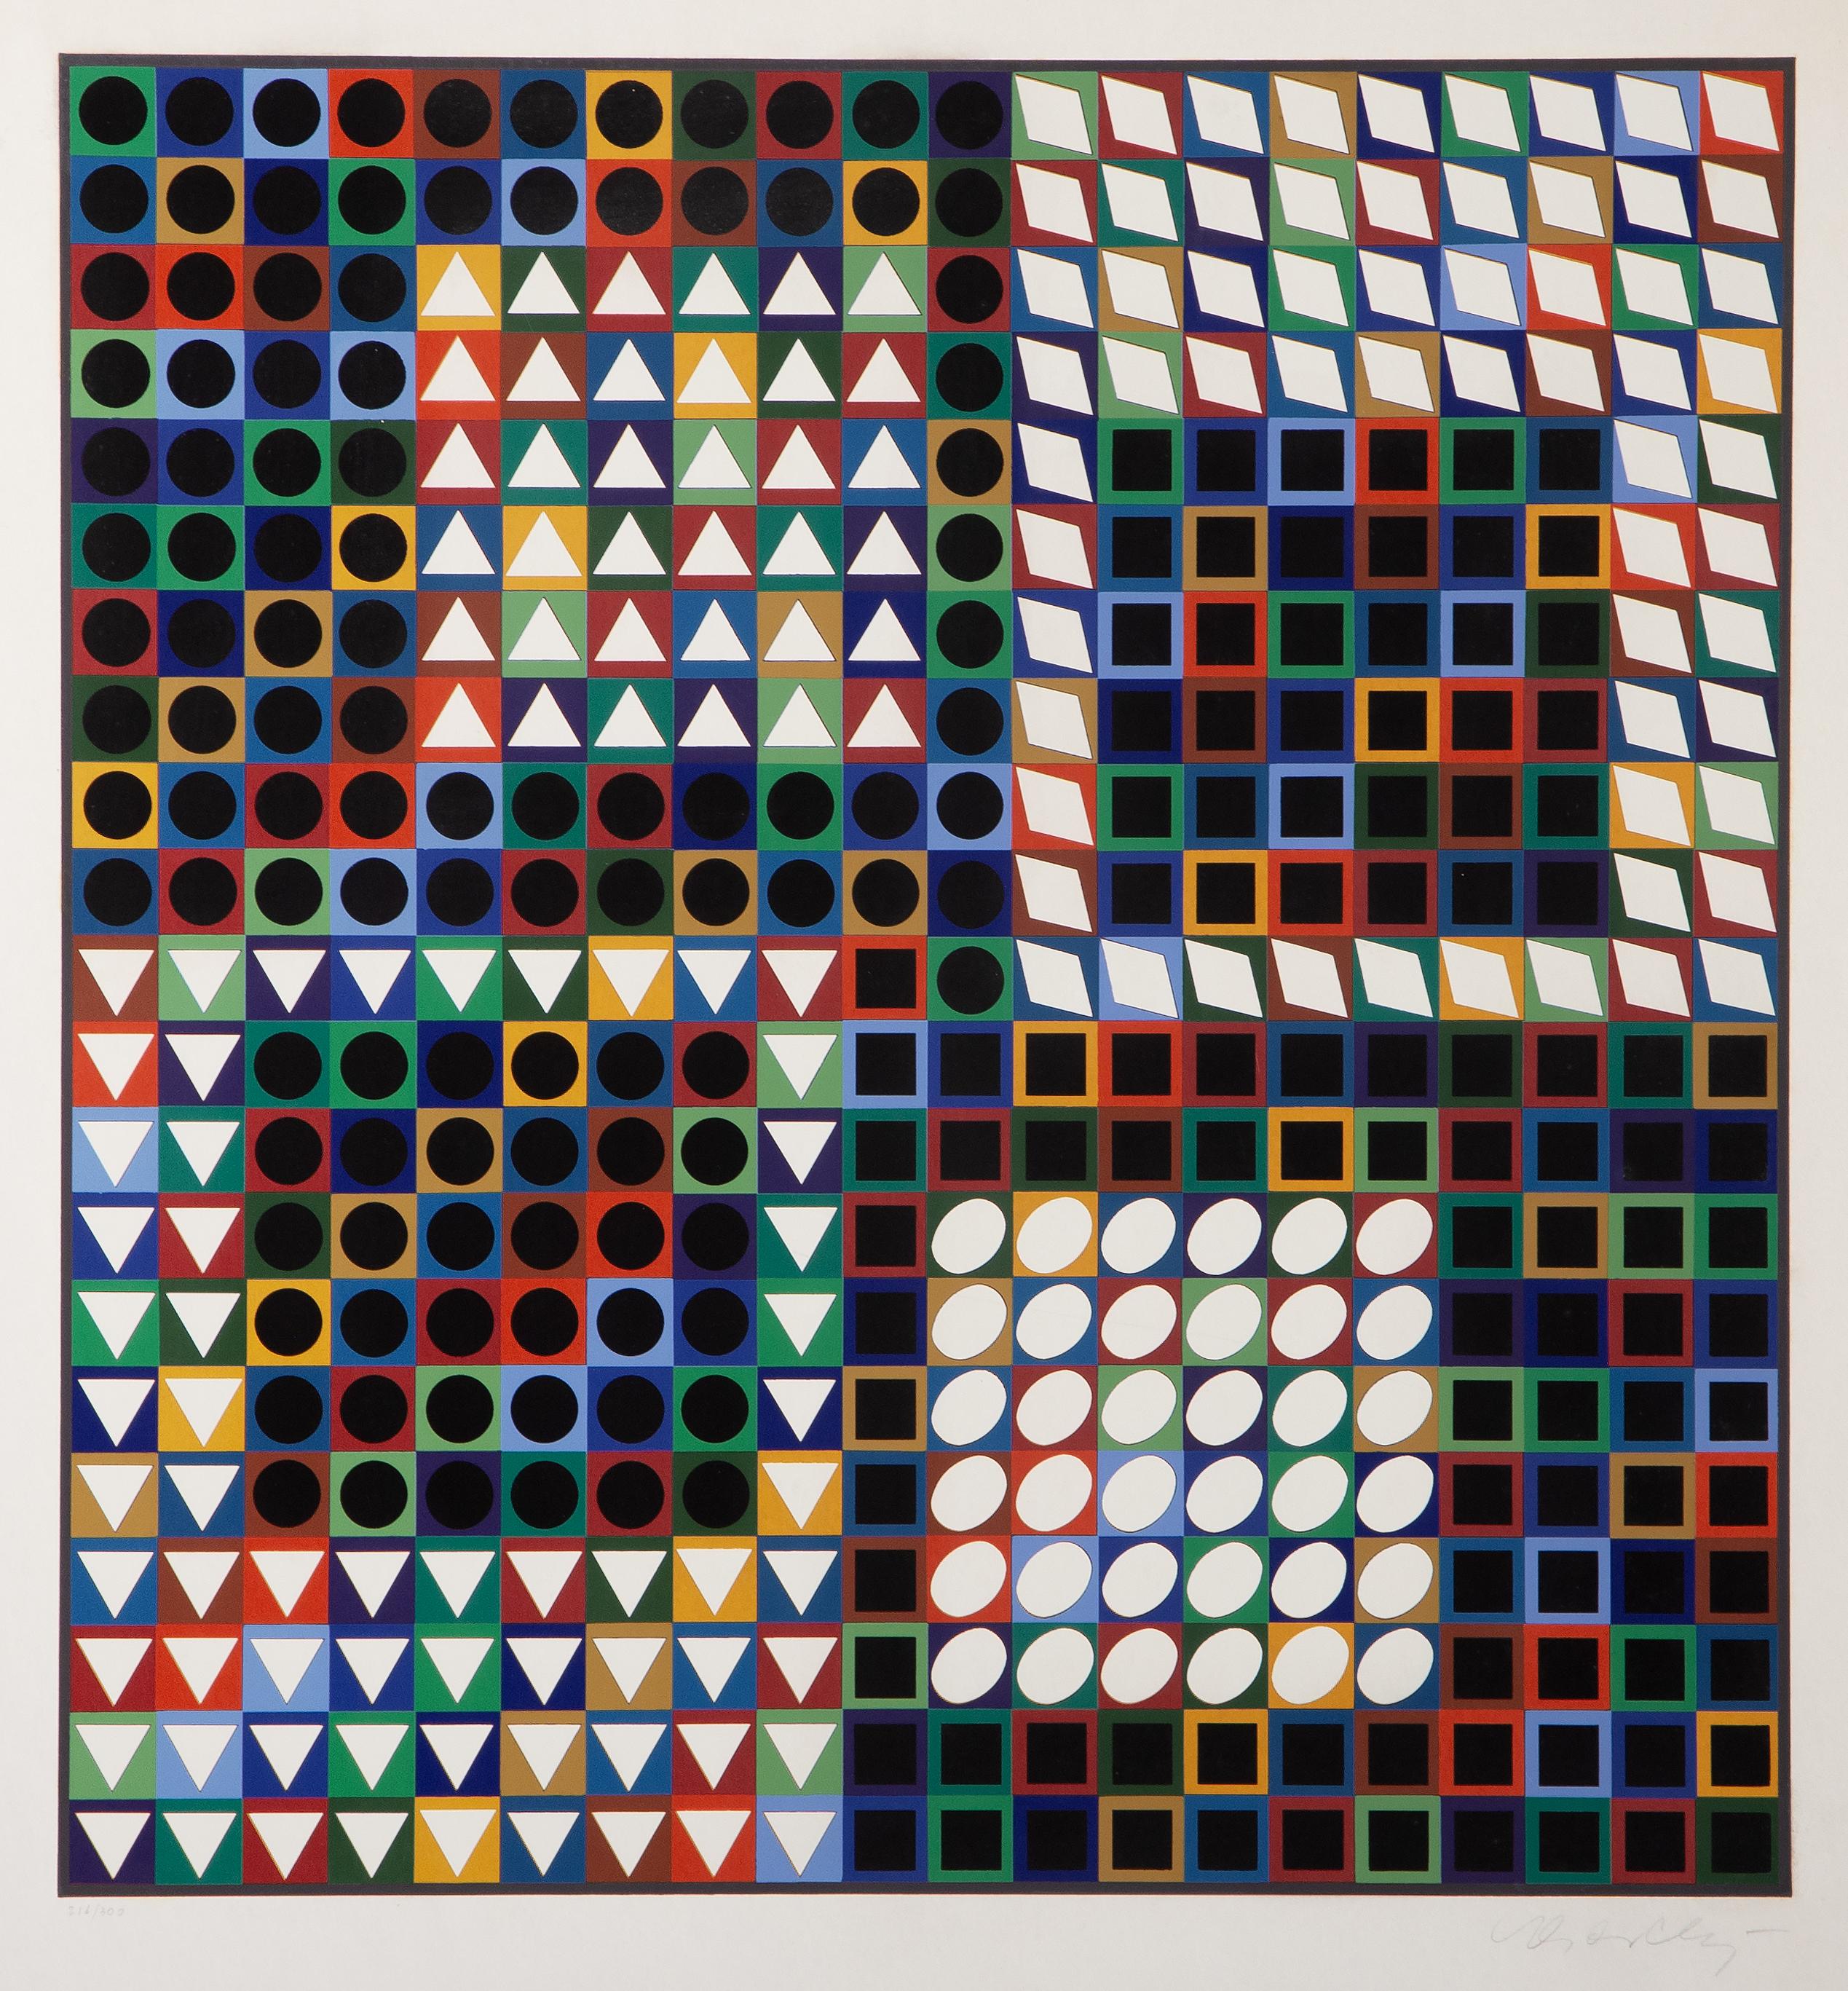 How many paintings did Victor Vasarely make?